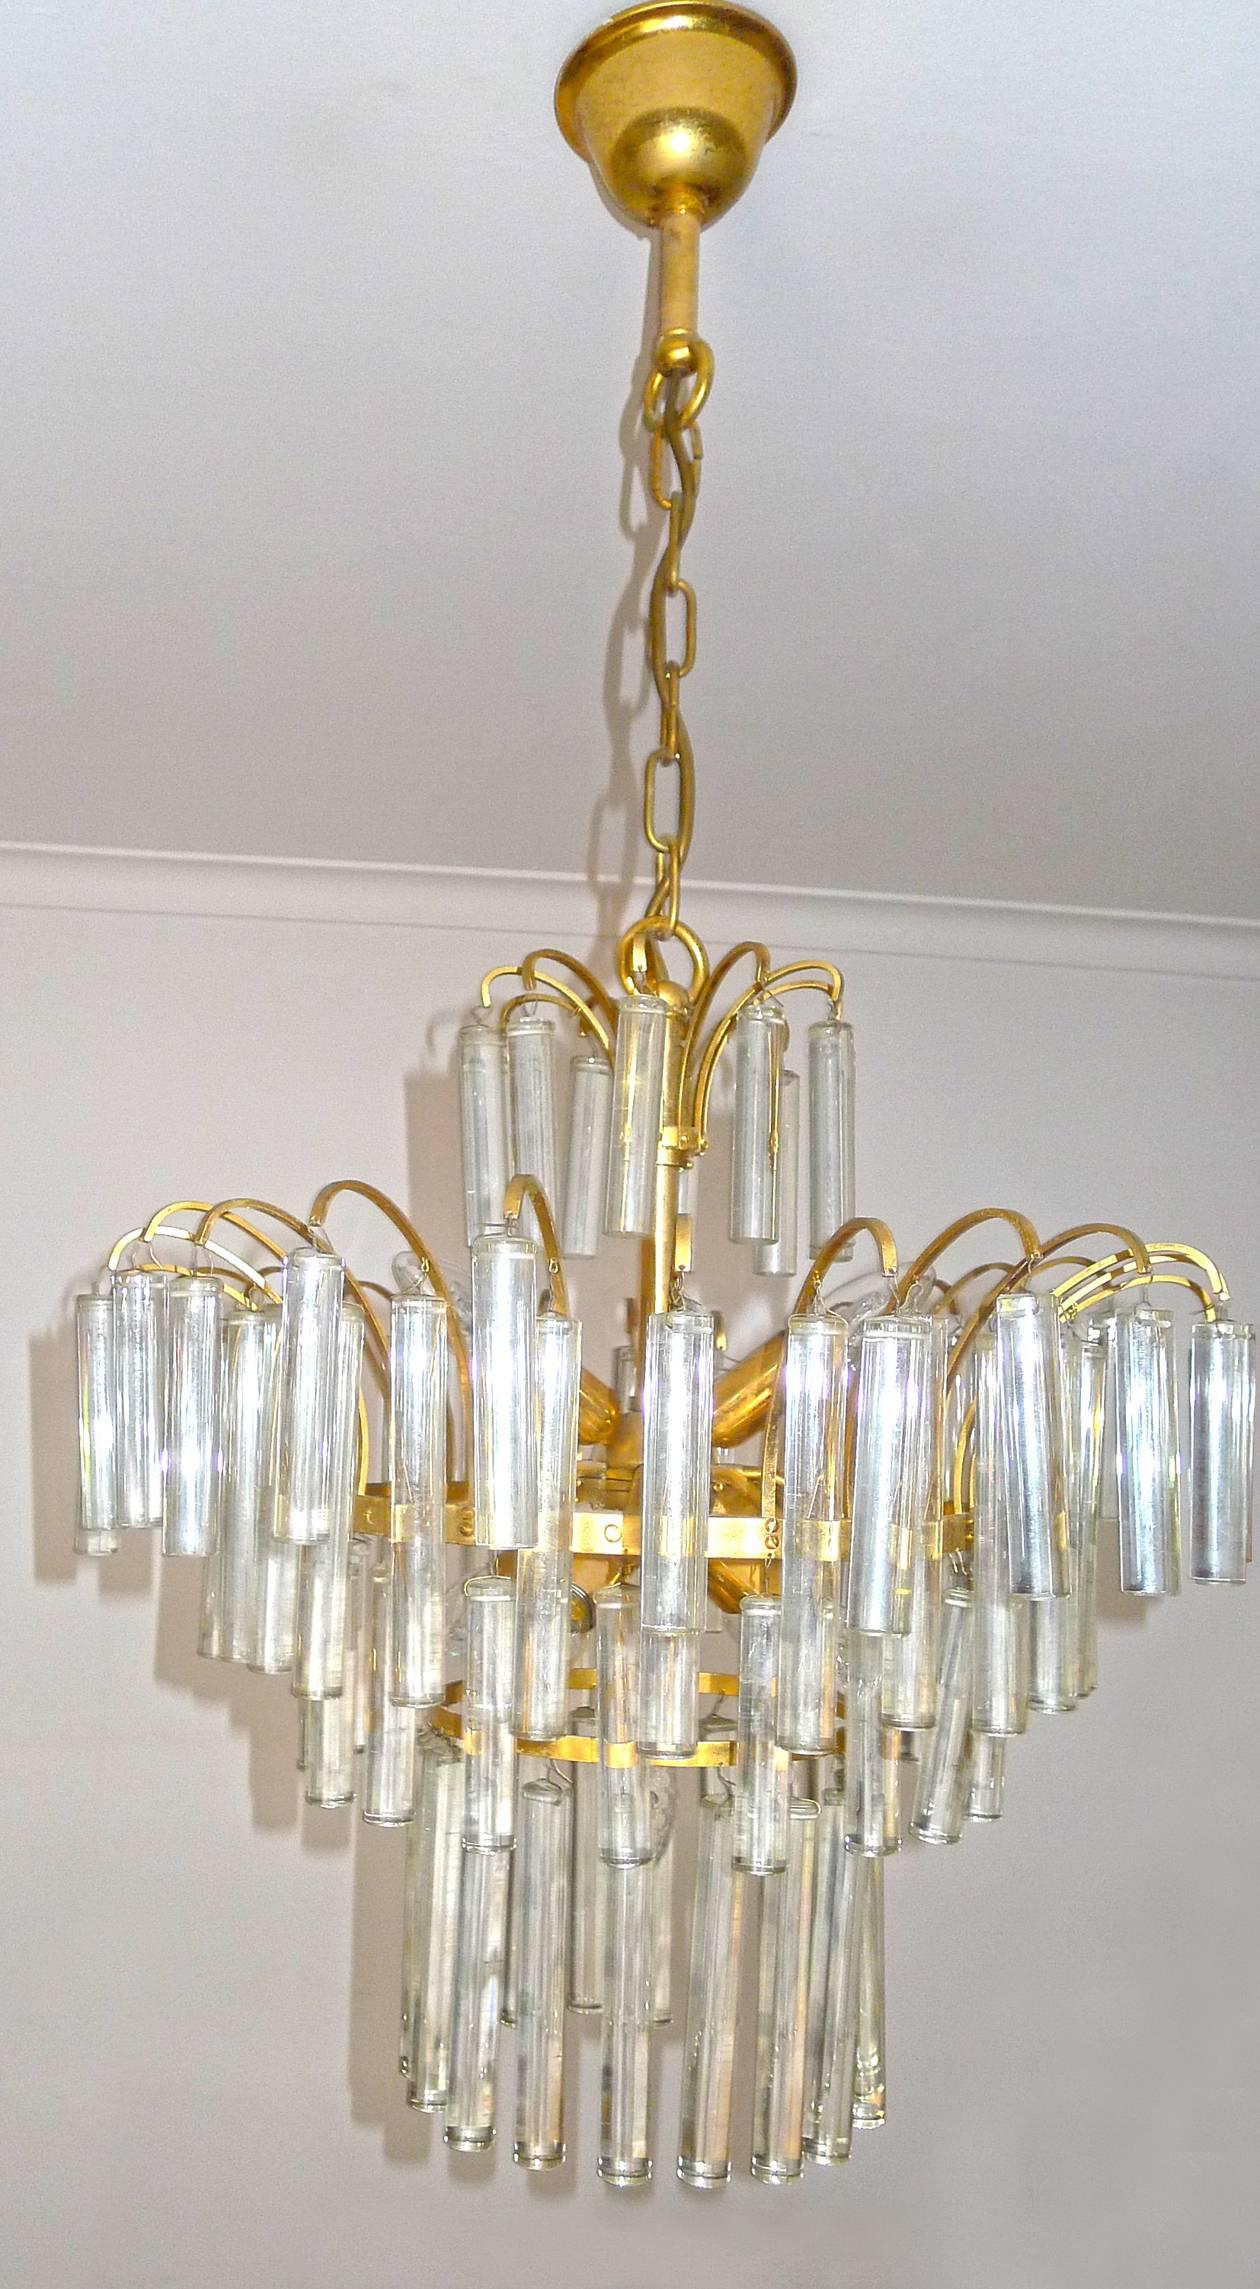 Hollywood Regency Large Venini Camer Midcentury Gilt Brass 94 Crystal Rods Waterfall Chandelier For Sale